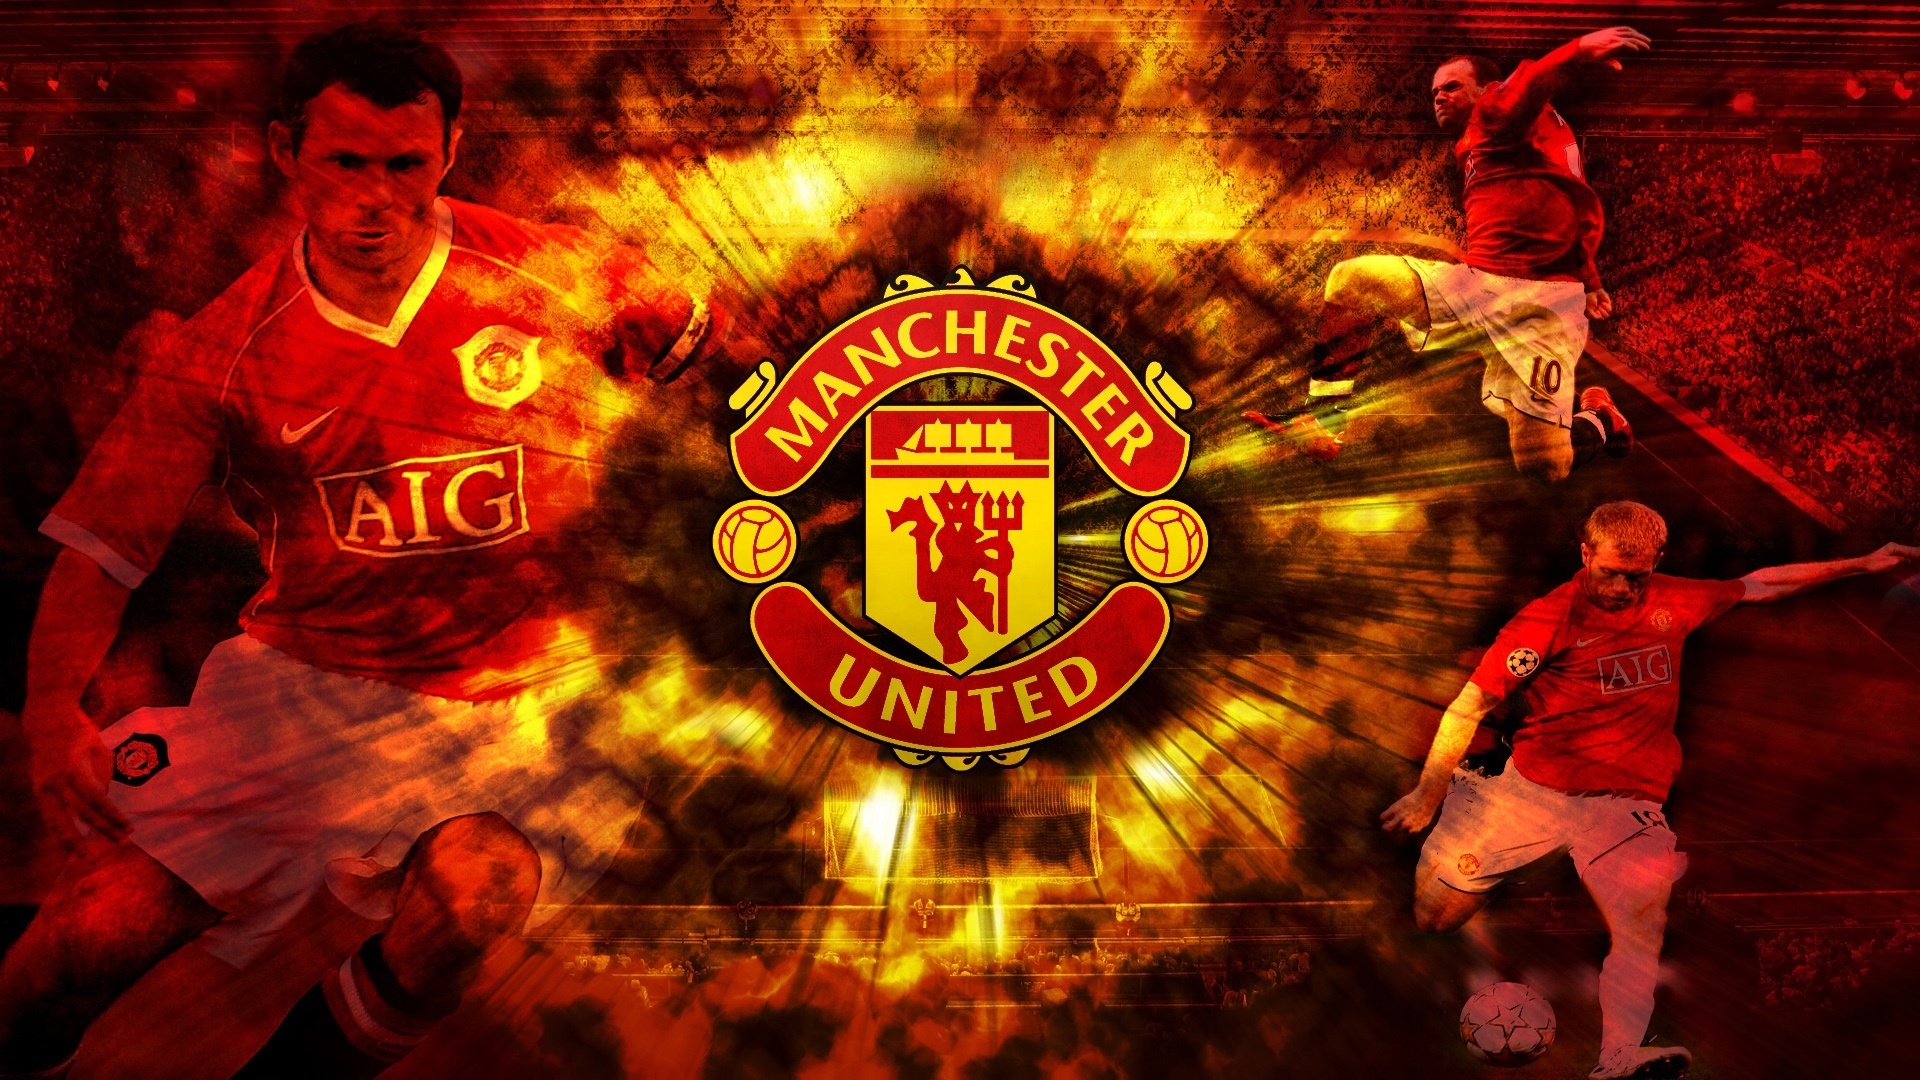 Manchester United Collage for 1920 x 1080 HDTV 1080p resolution